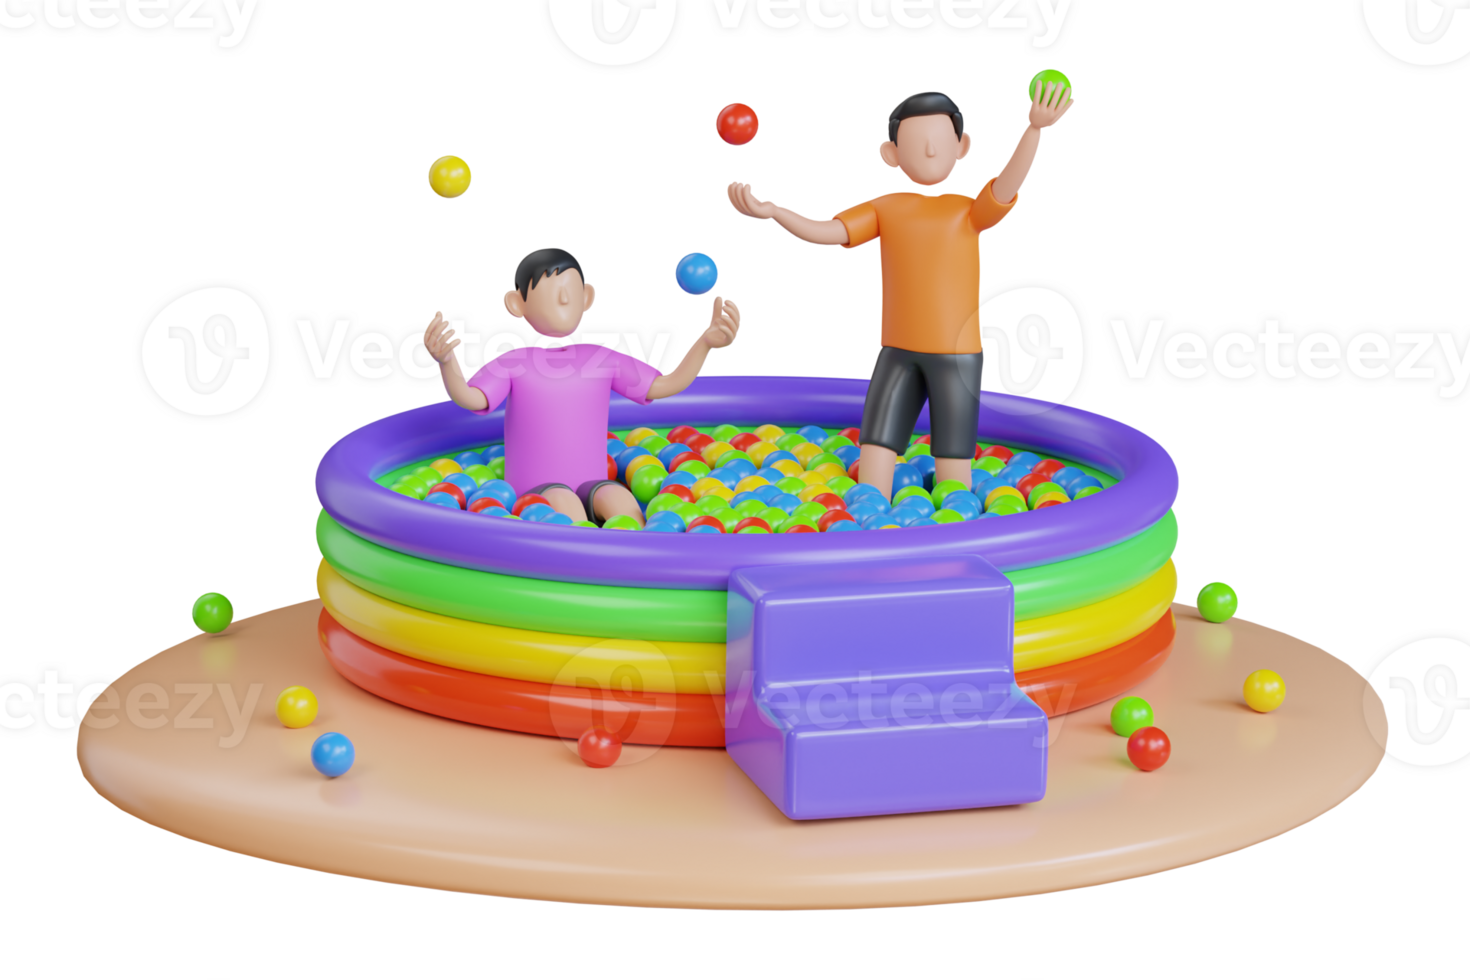 Many Colorful Plastic Balls Falled and Filled Children Pool. plastic balls filled child pool. 3d illustration png